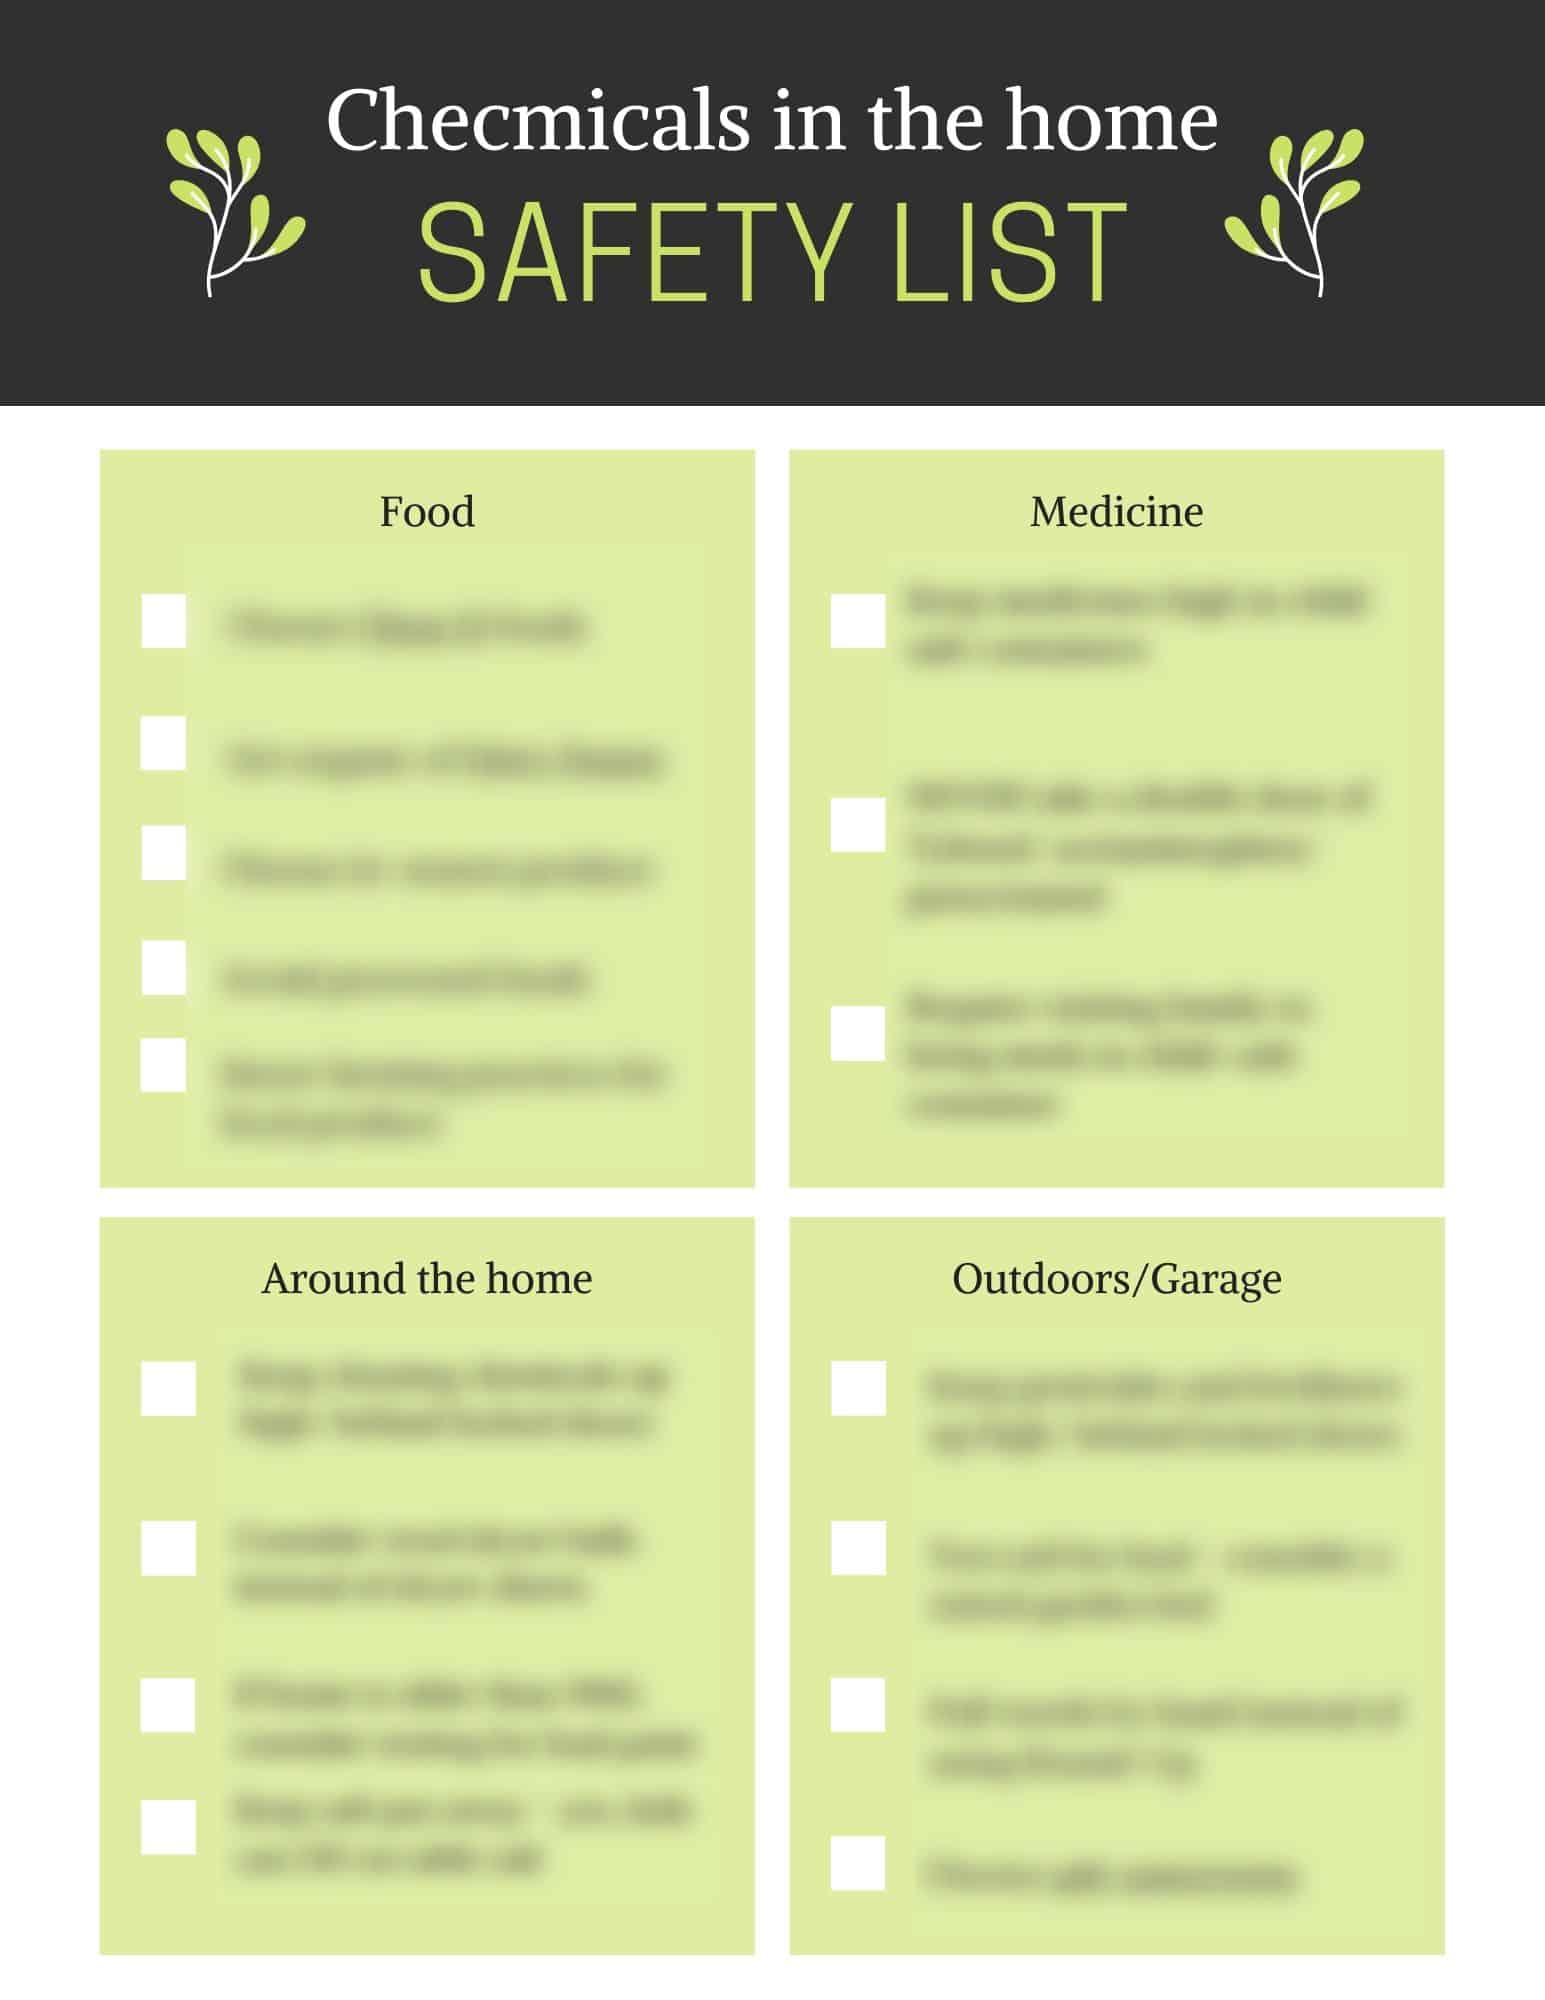 Chemical safety checklist for home